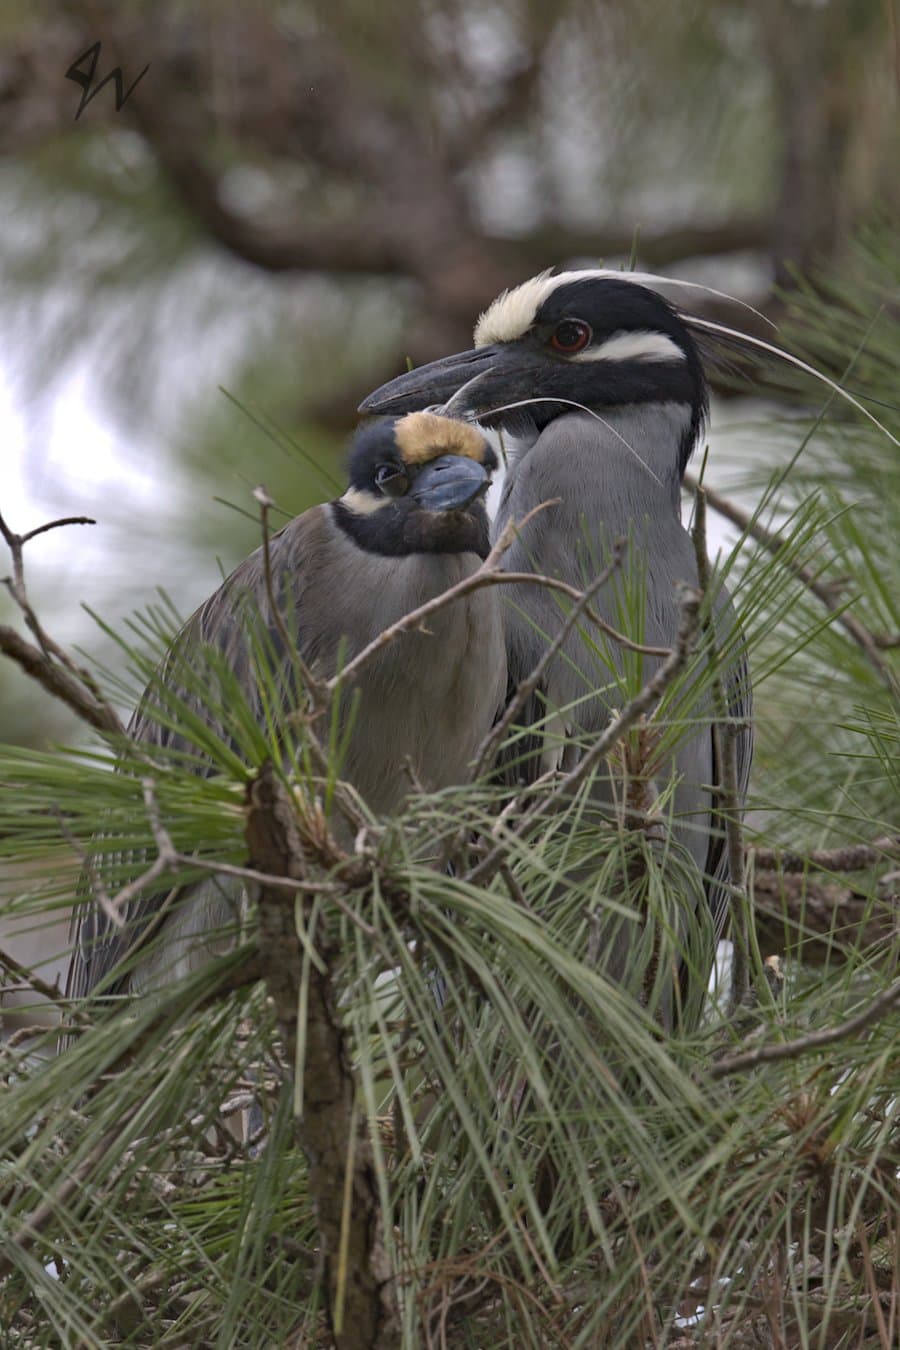 Yellow-crowned Night Heron mates in nest.